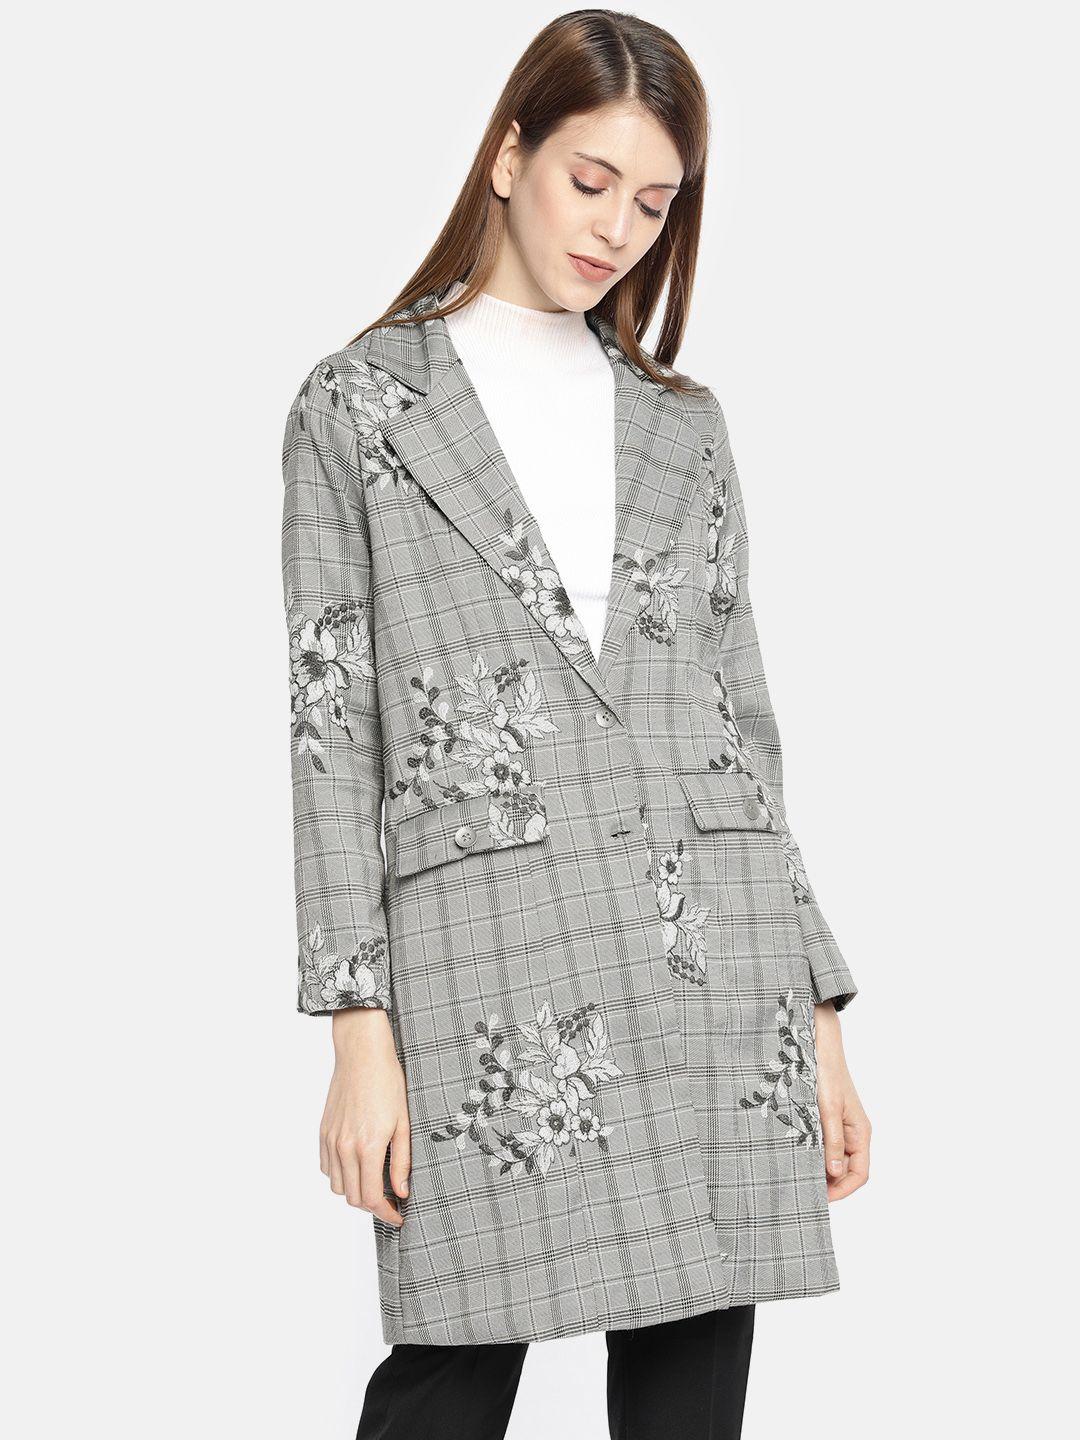 and-women-grey-&-white-checked-longline-tailored-jacket